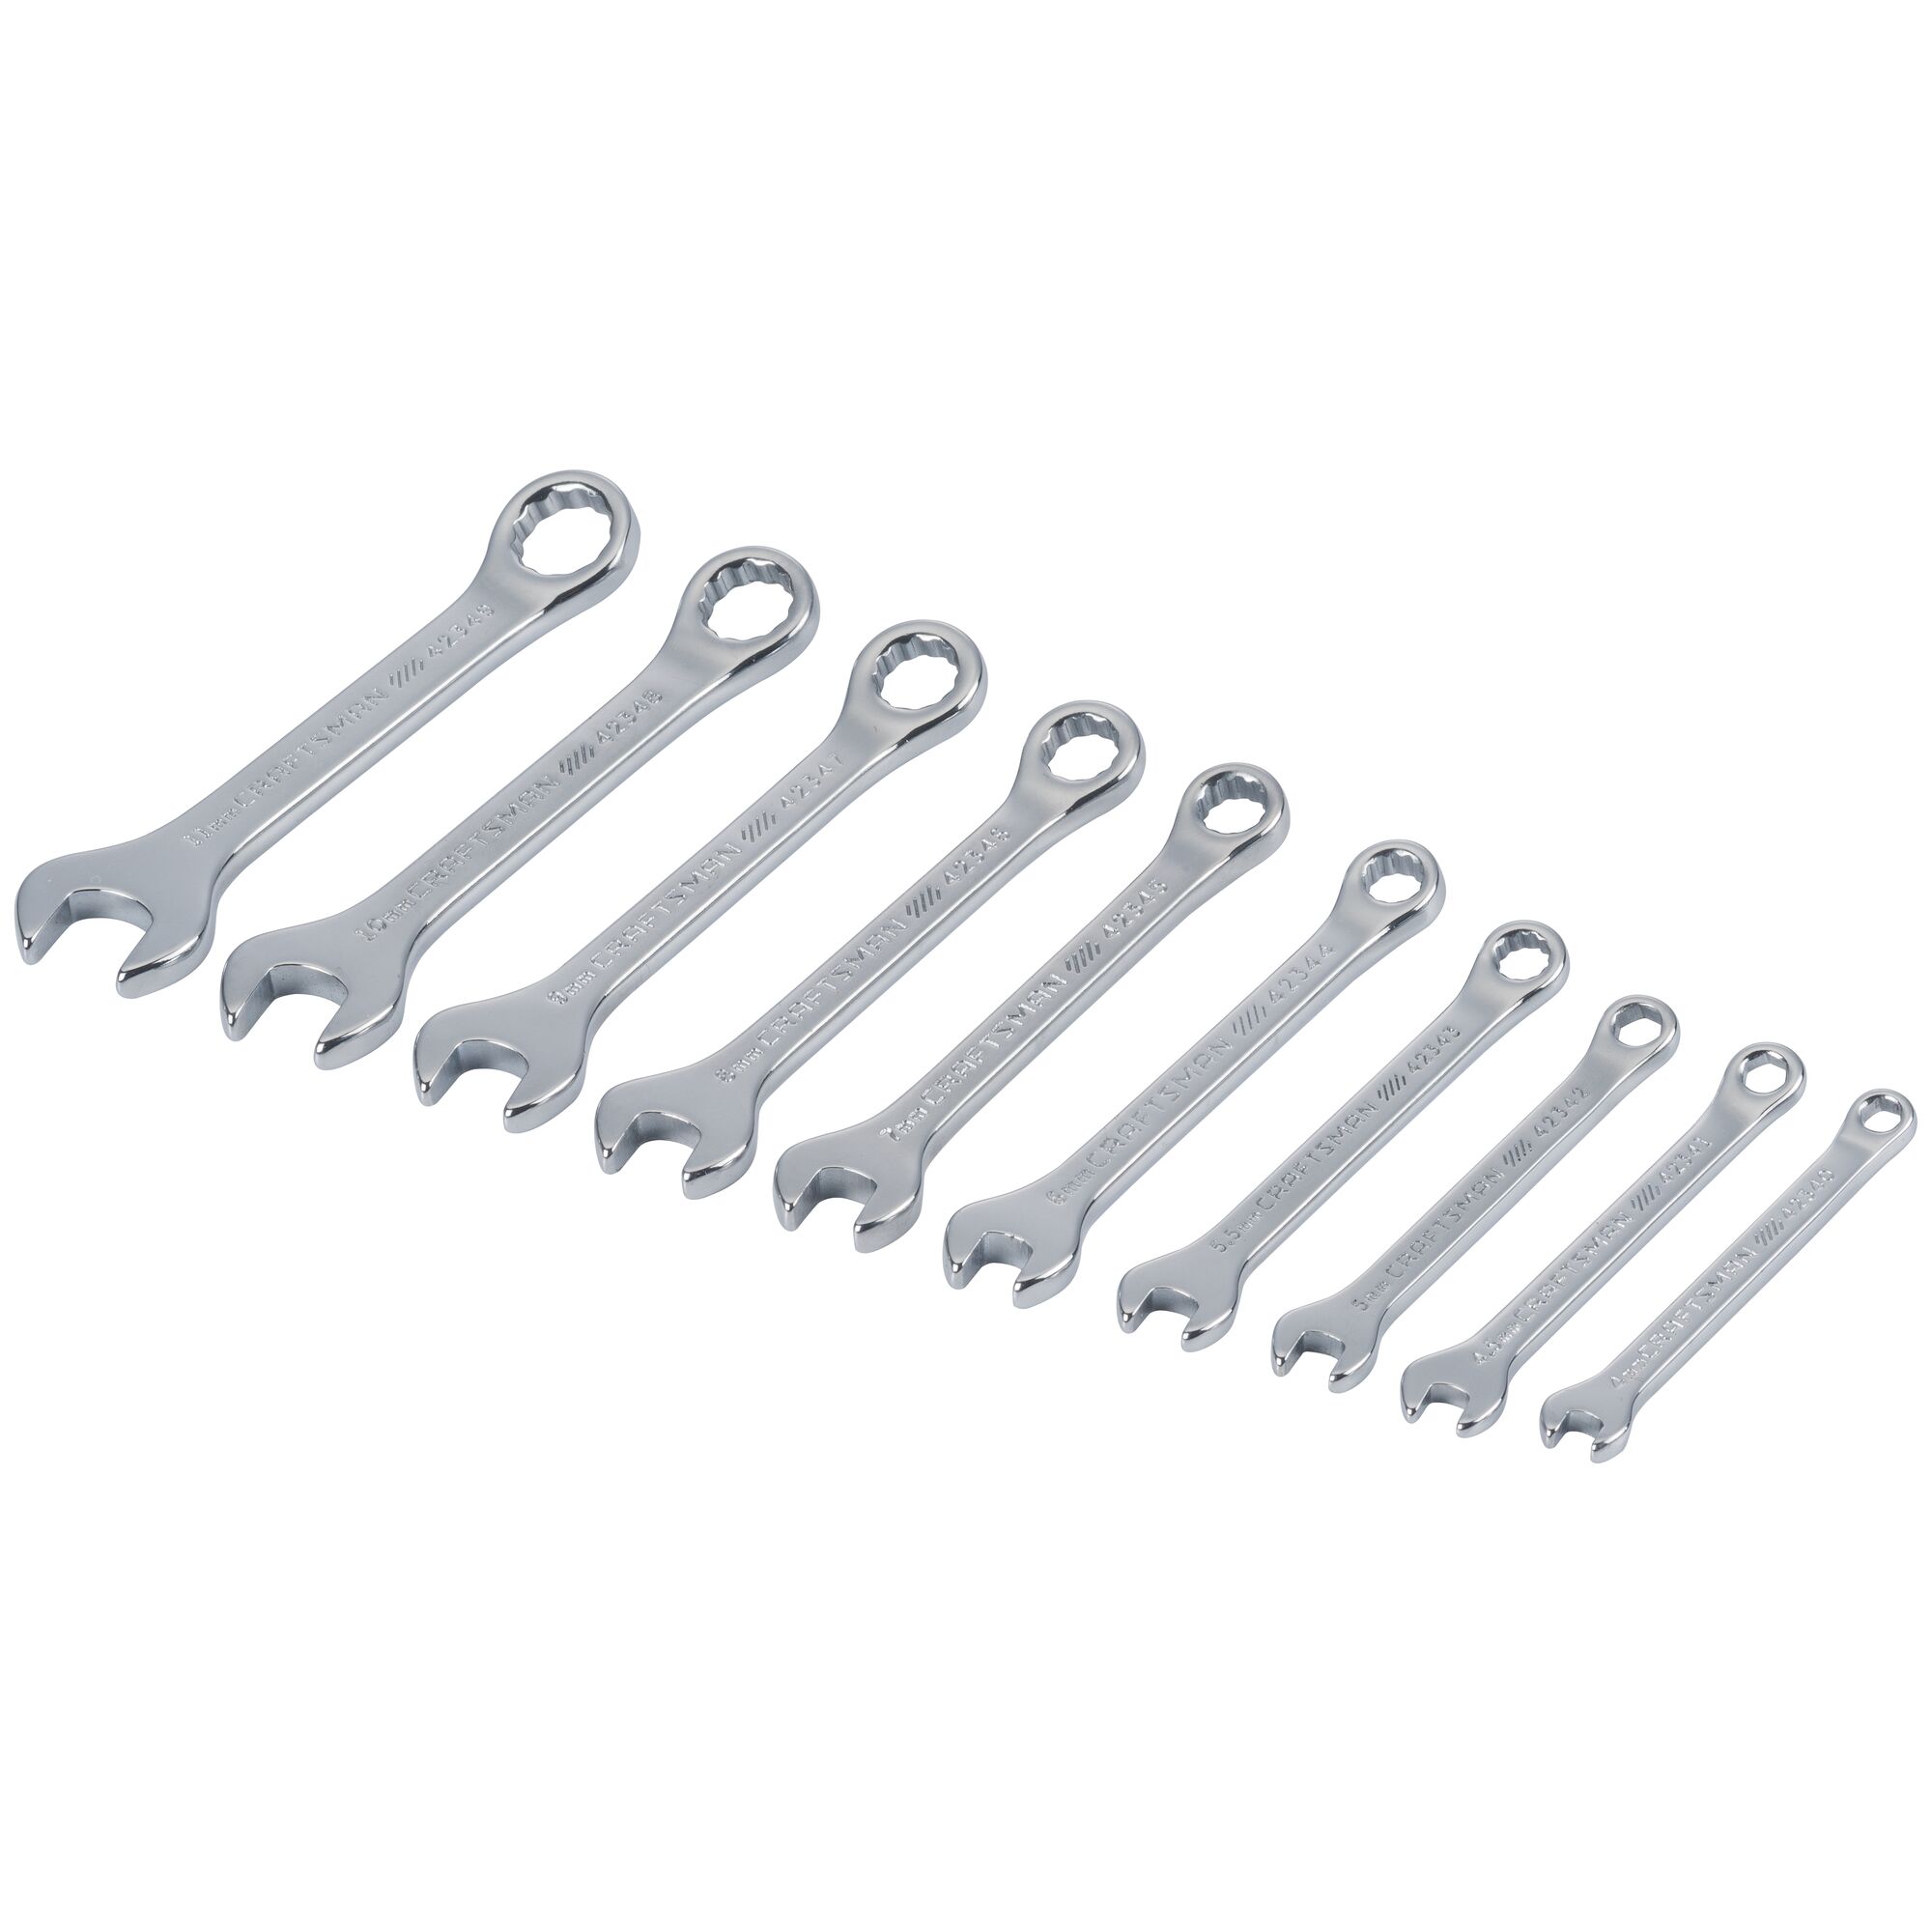 View of CRAFTSMAN Wrenches: Combination on white background